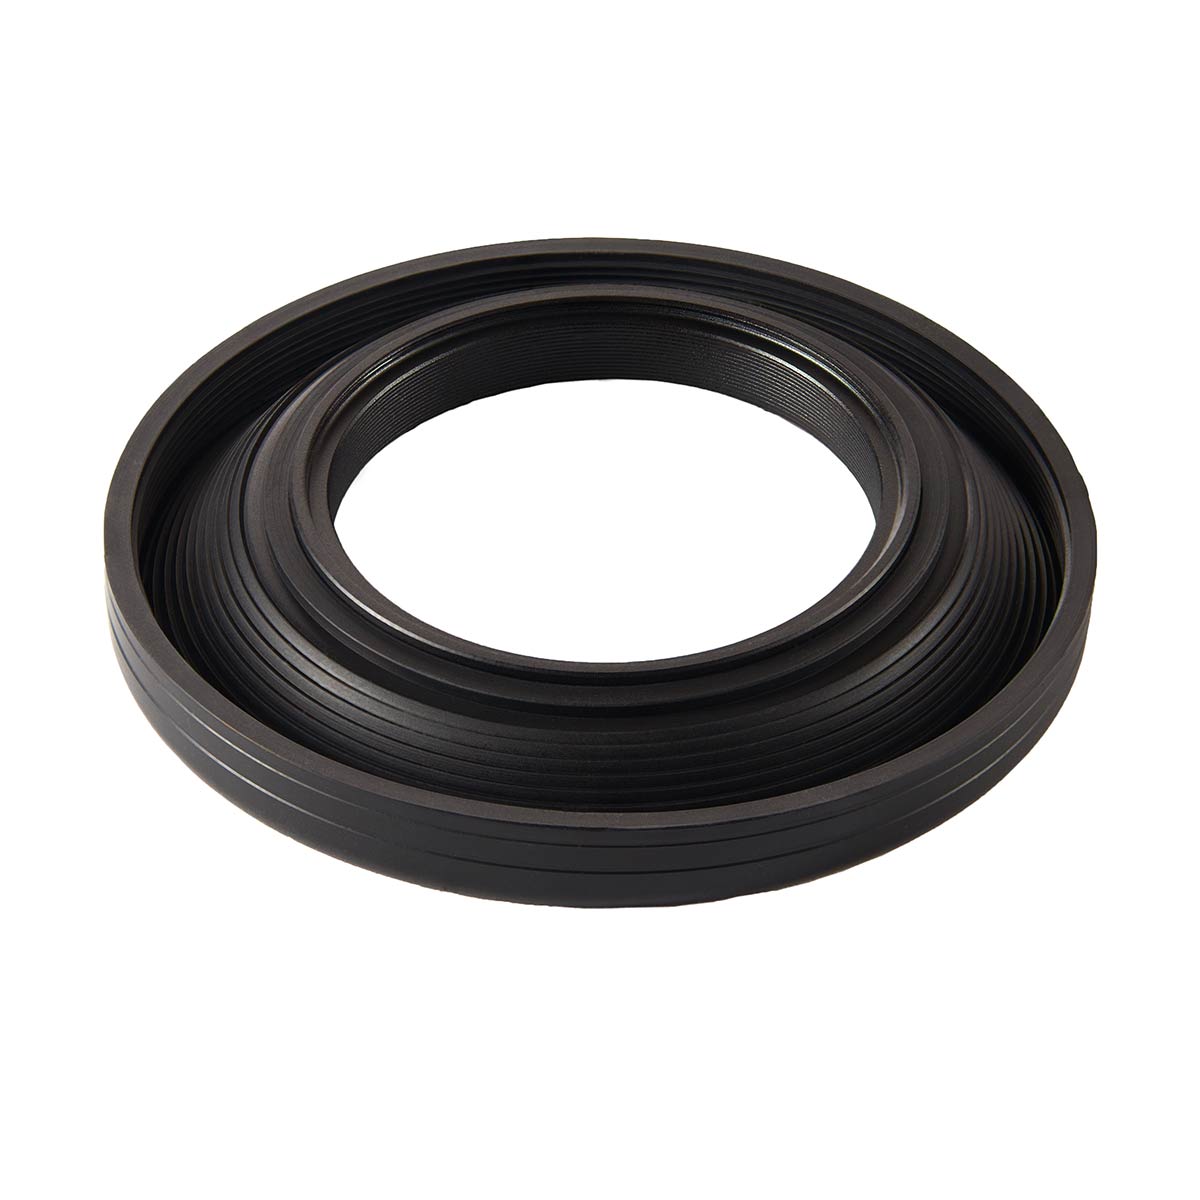 ProMaster Wide Angle Rubber Lens Hood - 62mm